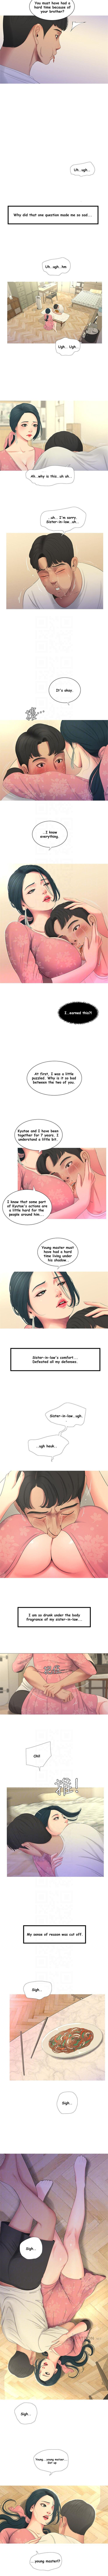 One's In-Laws Virgins Chapter 1-6 (Ongoing) [English] 30